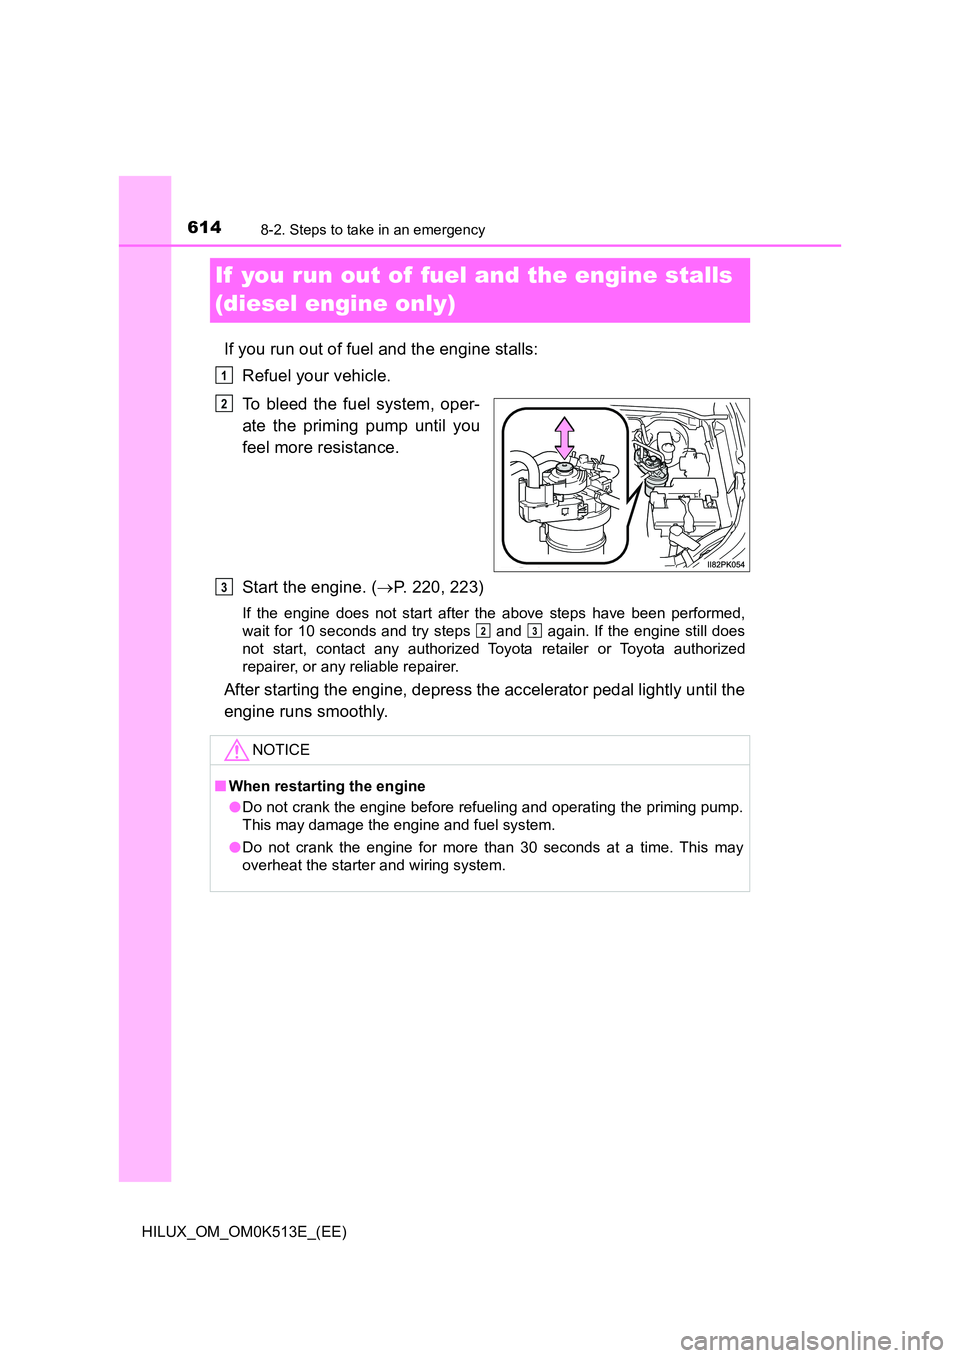 TOYOTA HILUX 2021  Owners Manual (in English) 6148-2. Steps to take in an emergency
HILUX_OM_OM0K513E_(EE)
If  you run out of  fuel and the engine stalls  
(diesel engine only)
If you run out of fuel and the engine stalls: 
Refuel your vehicle. 
